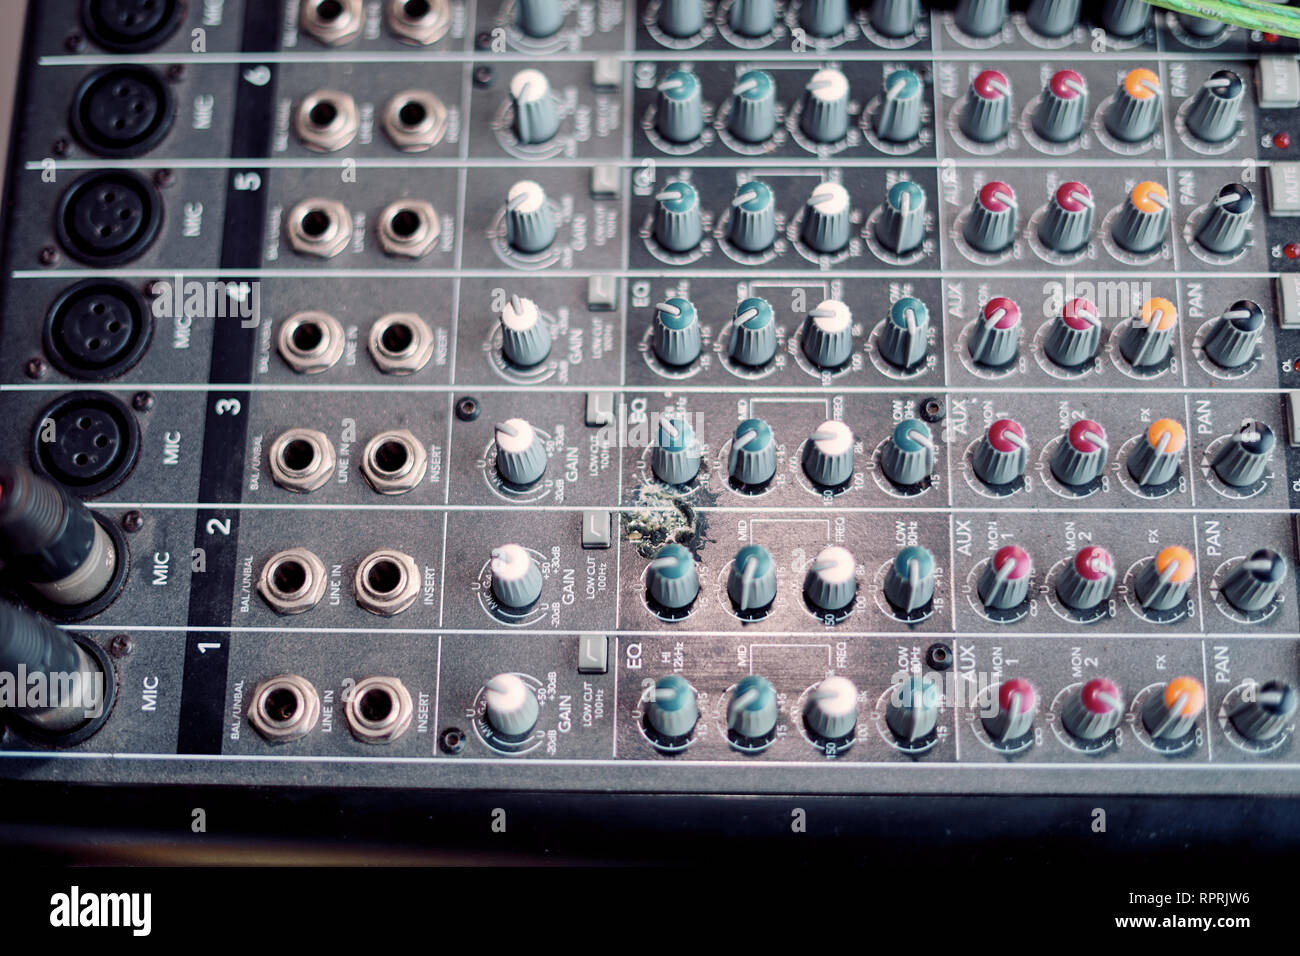 Old Panel of audio mixing console Stock Photo -